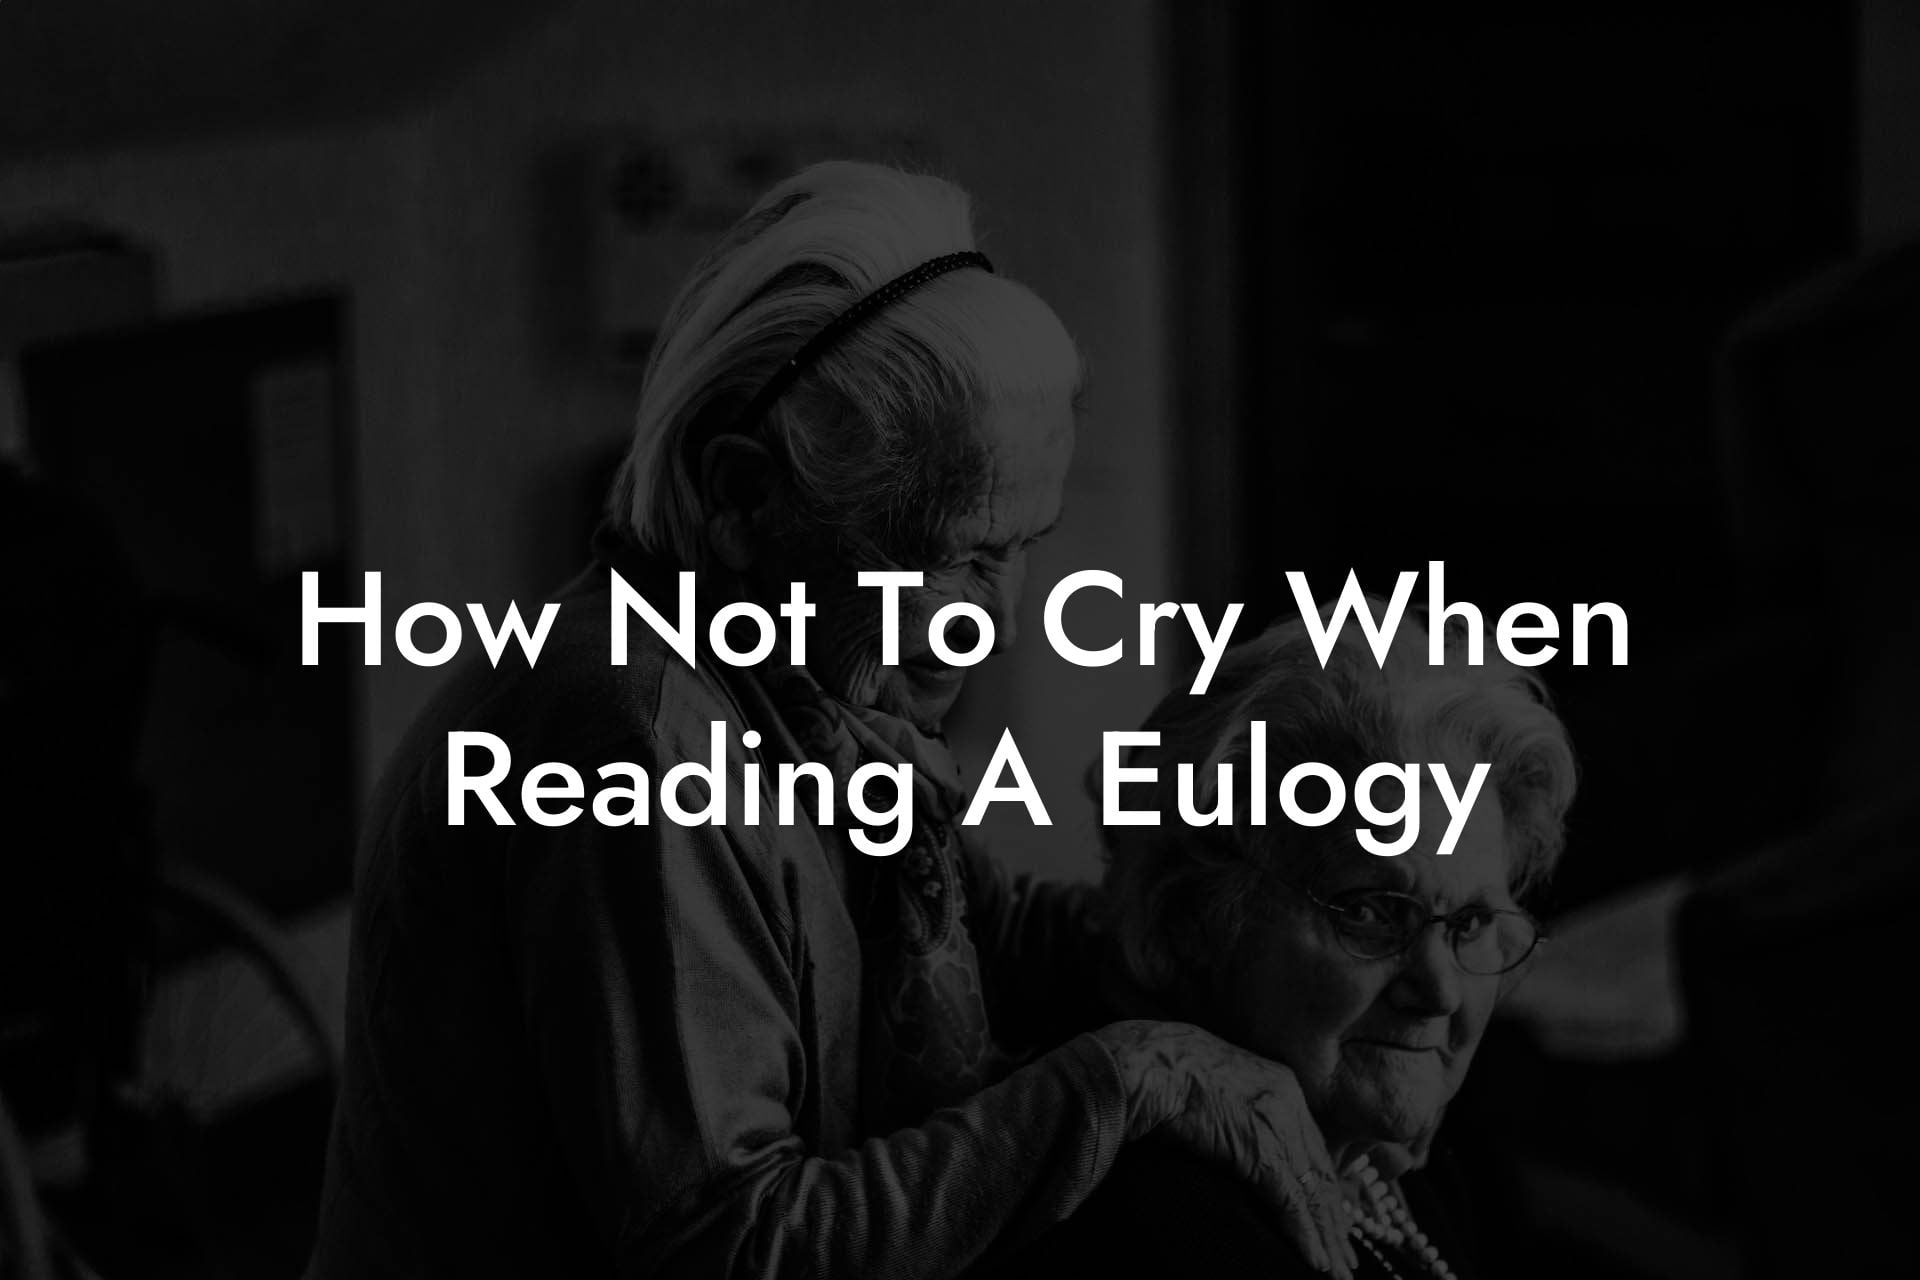 How Not To Cry When Reading A Eulogy